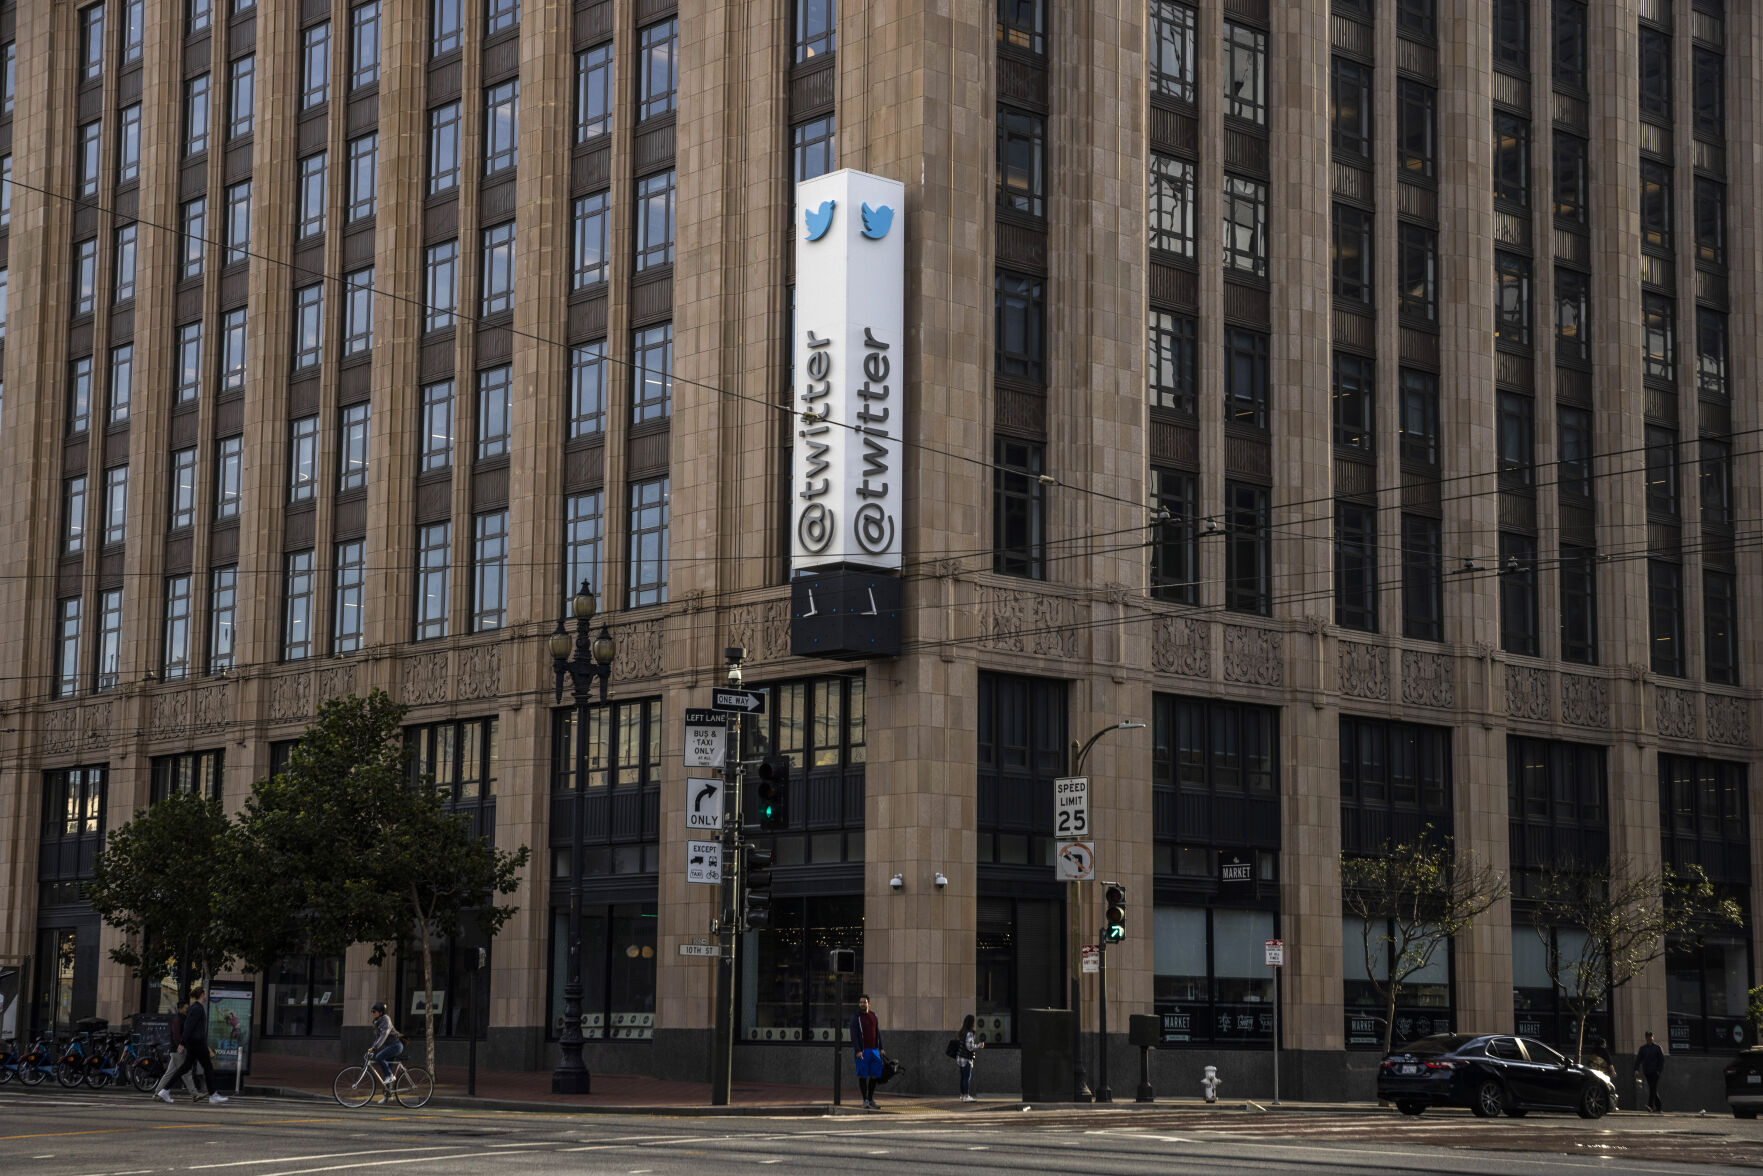 <p>The headquarters for the social media company Twitter is seen in San Francisco, on Friday, Nov. 11, 2022. (Stephen Lam/San Francisco Chronicle via AP)</p>   PHOTO CREDIT: Stephen Lam 